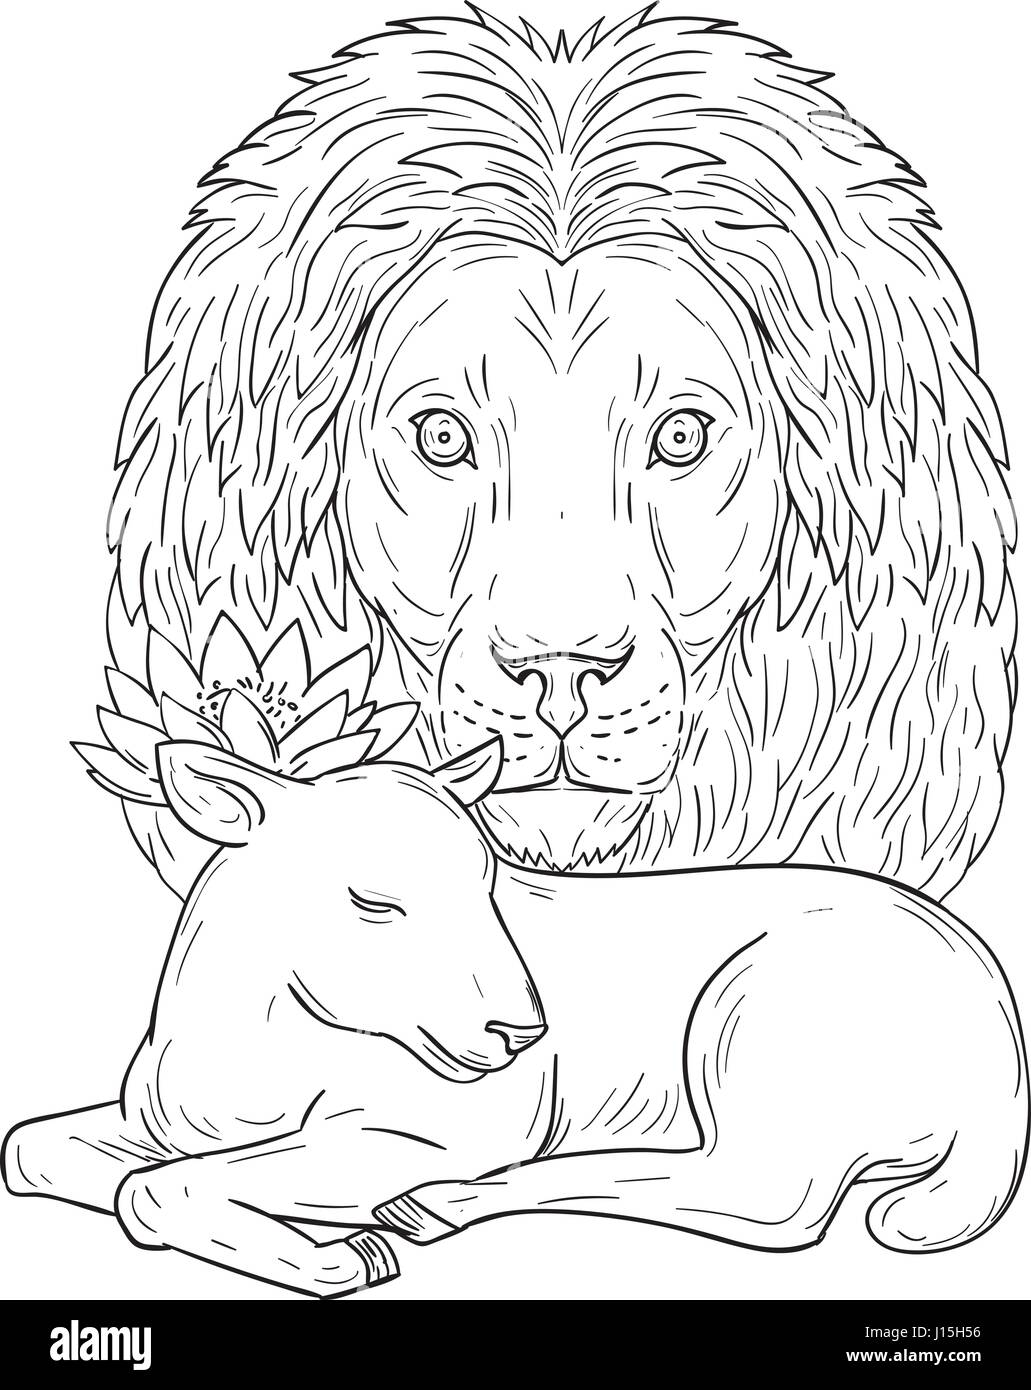 Drawing sketch style illustration of a lion head watching over a sleeping lamb viewed from front set on isolated white background. Stock Vector